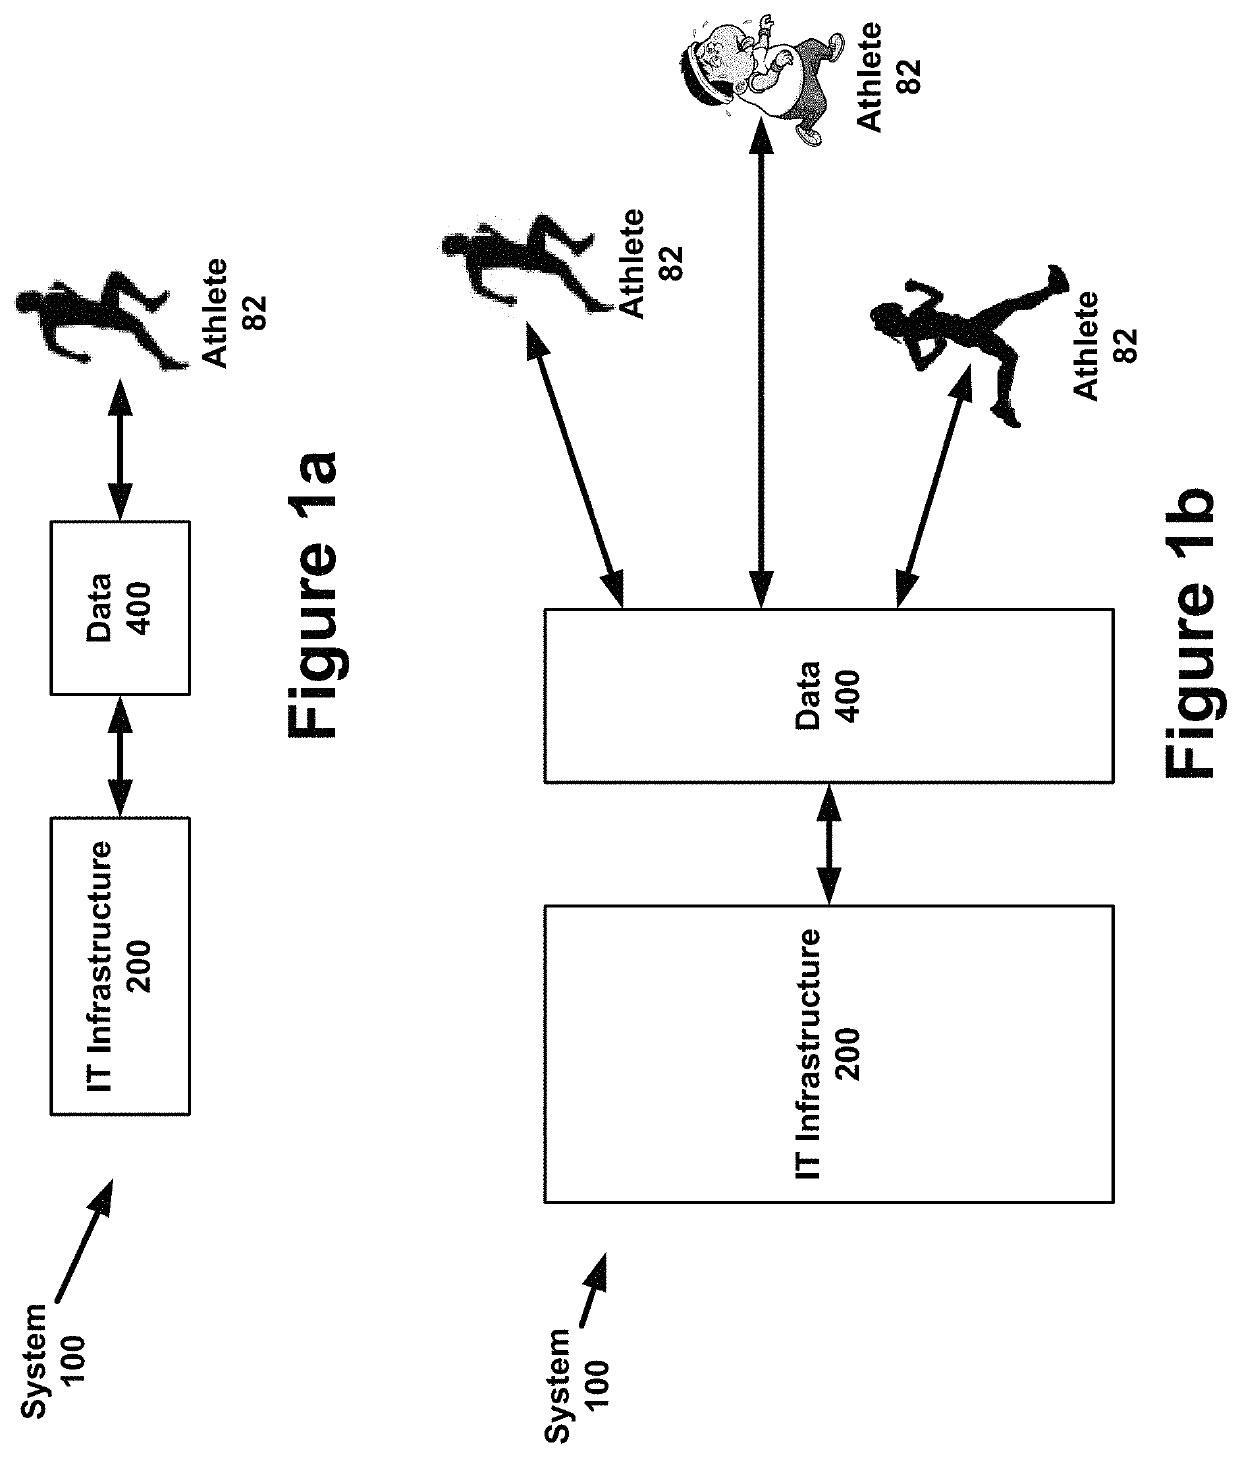 System and method for developing athletes